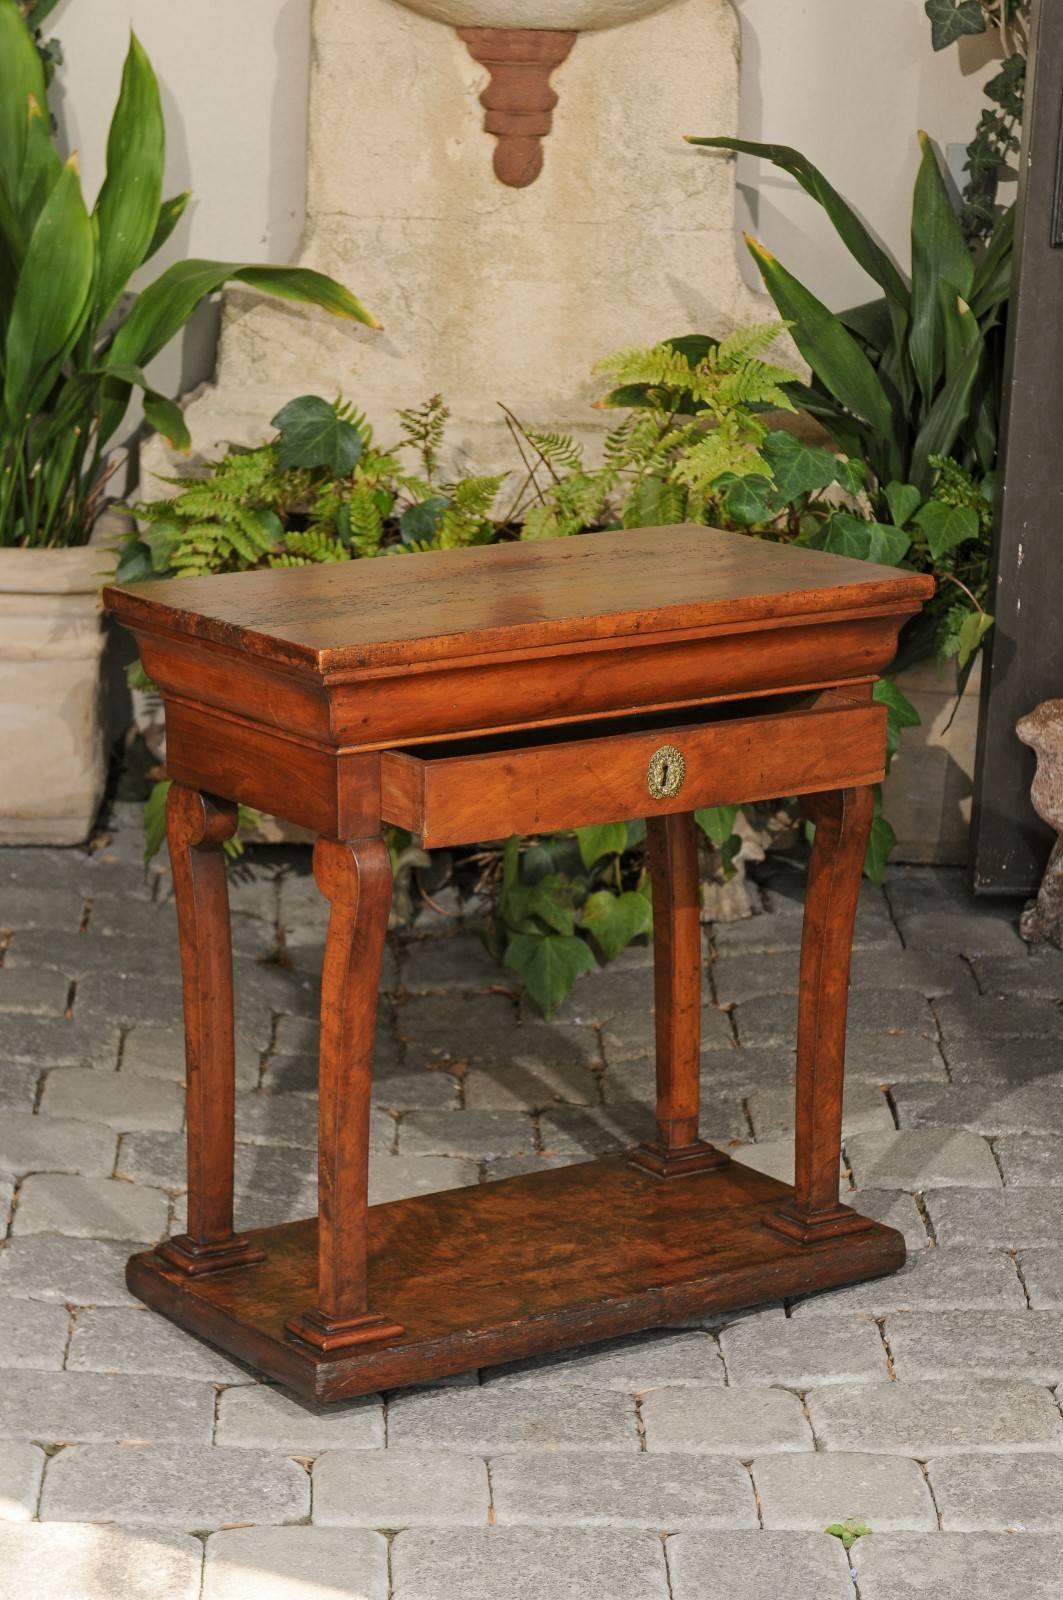 19th Century French Louis-Philippe Period Walnut Side Table with Scrolled Legs, circa 1850